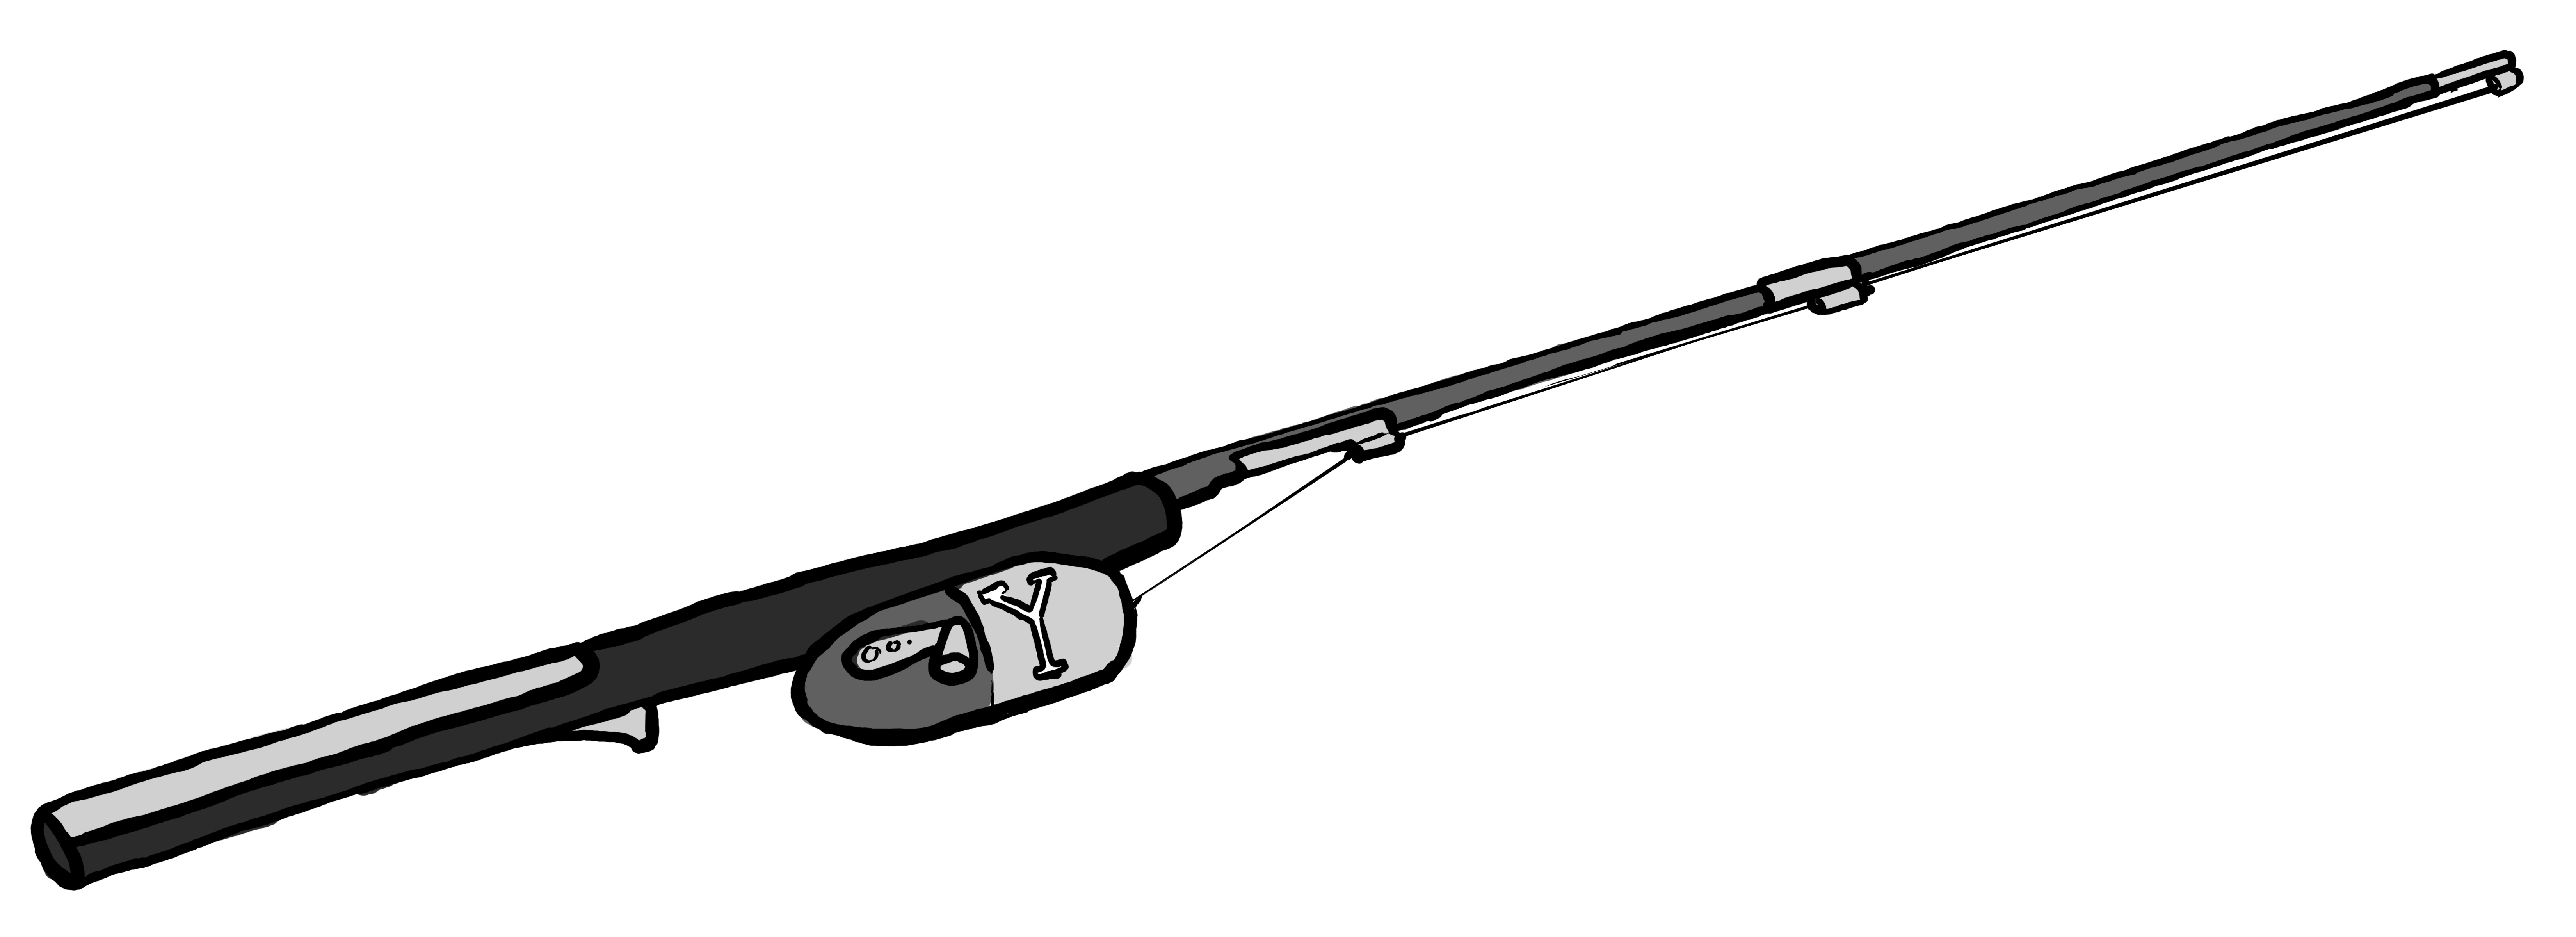 Fishing pole fishing rods and cartoon on clip art - Clipartix